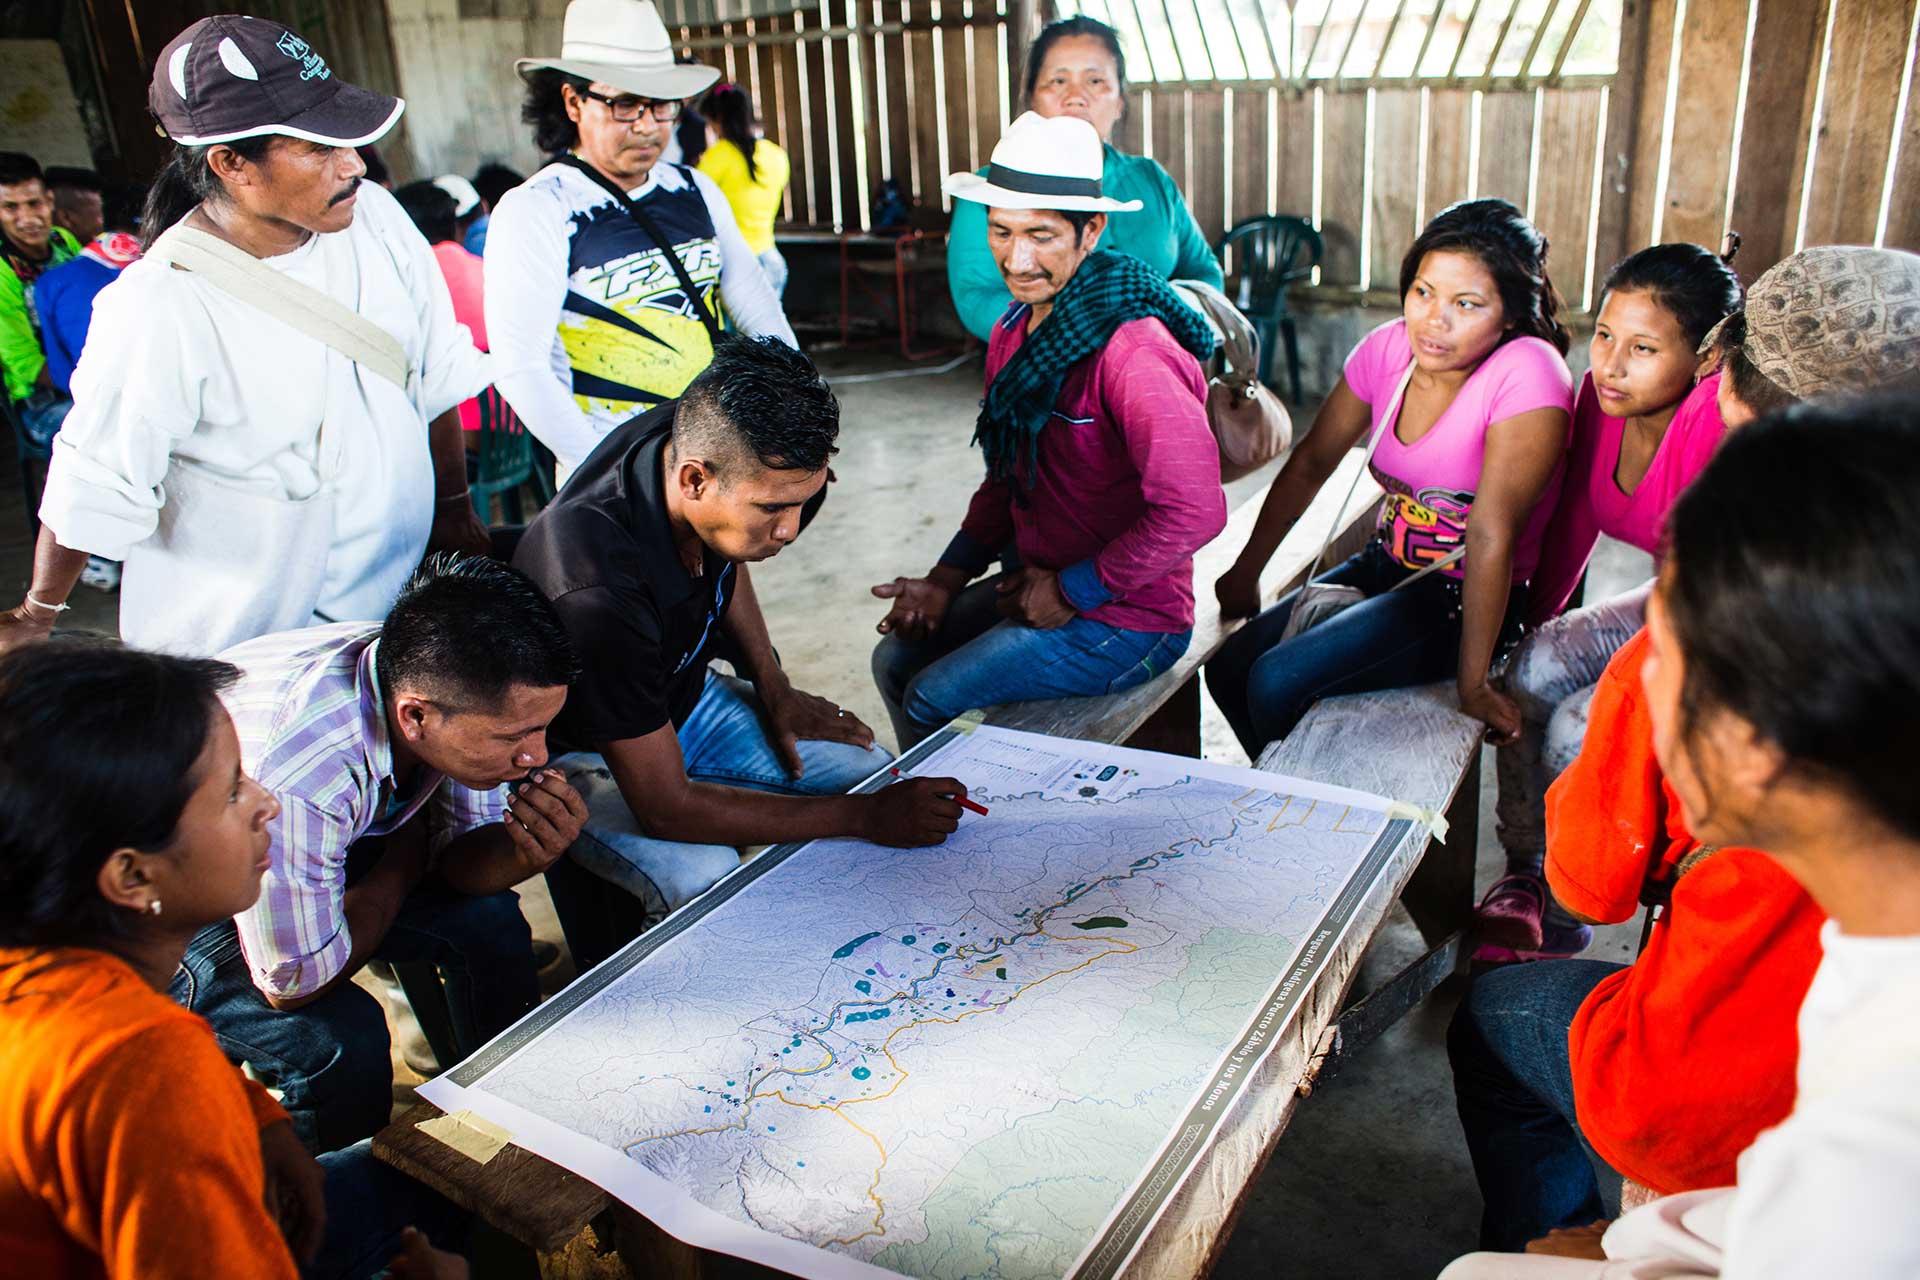 Members of indigenous community in Caqueta, Colombia work on a community map